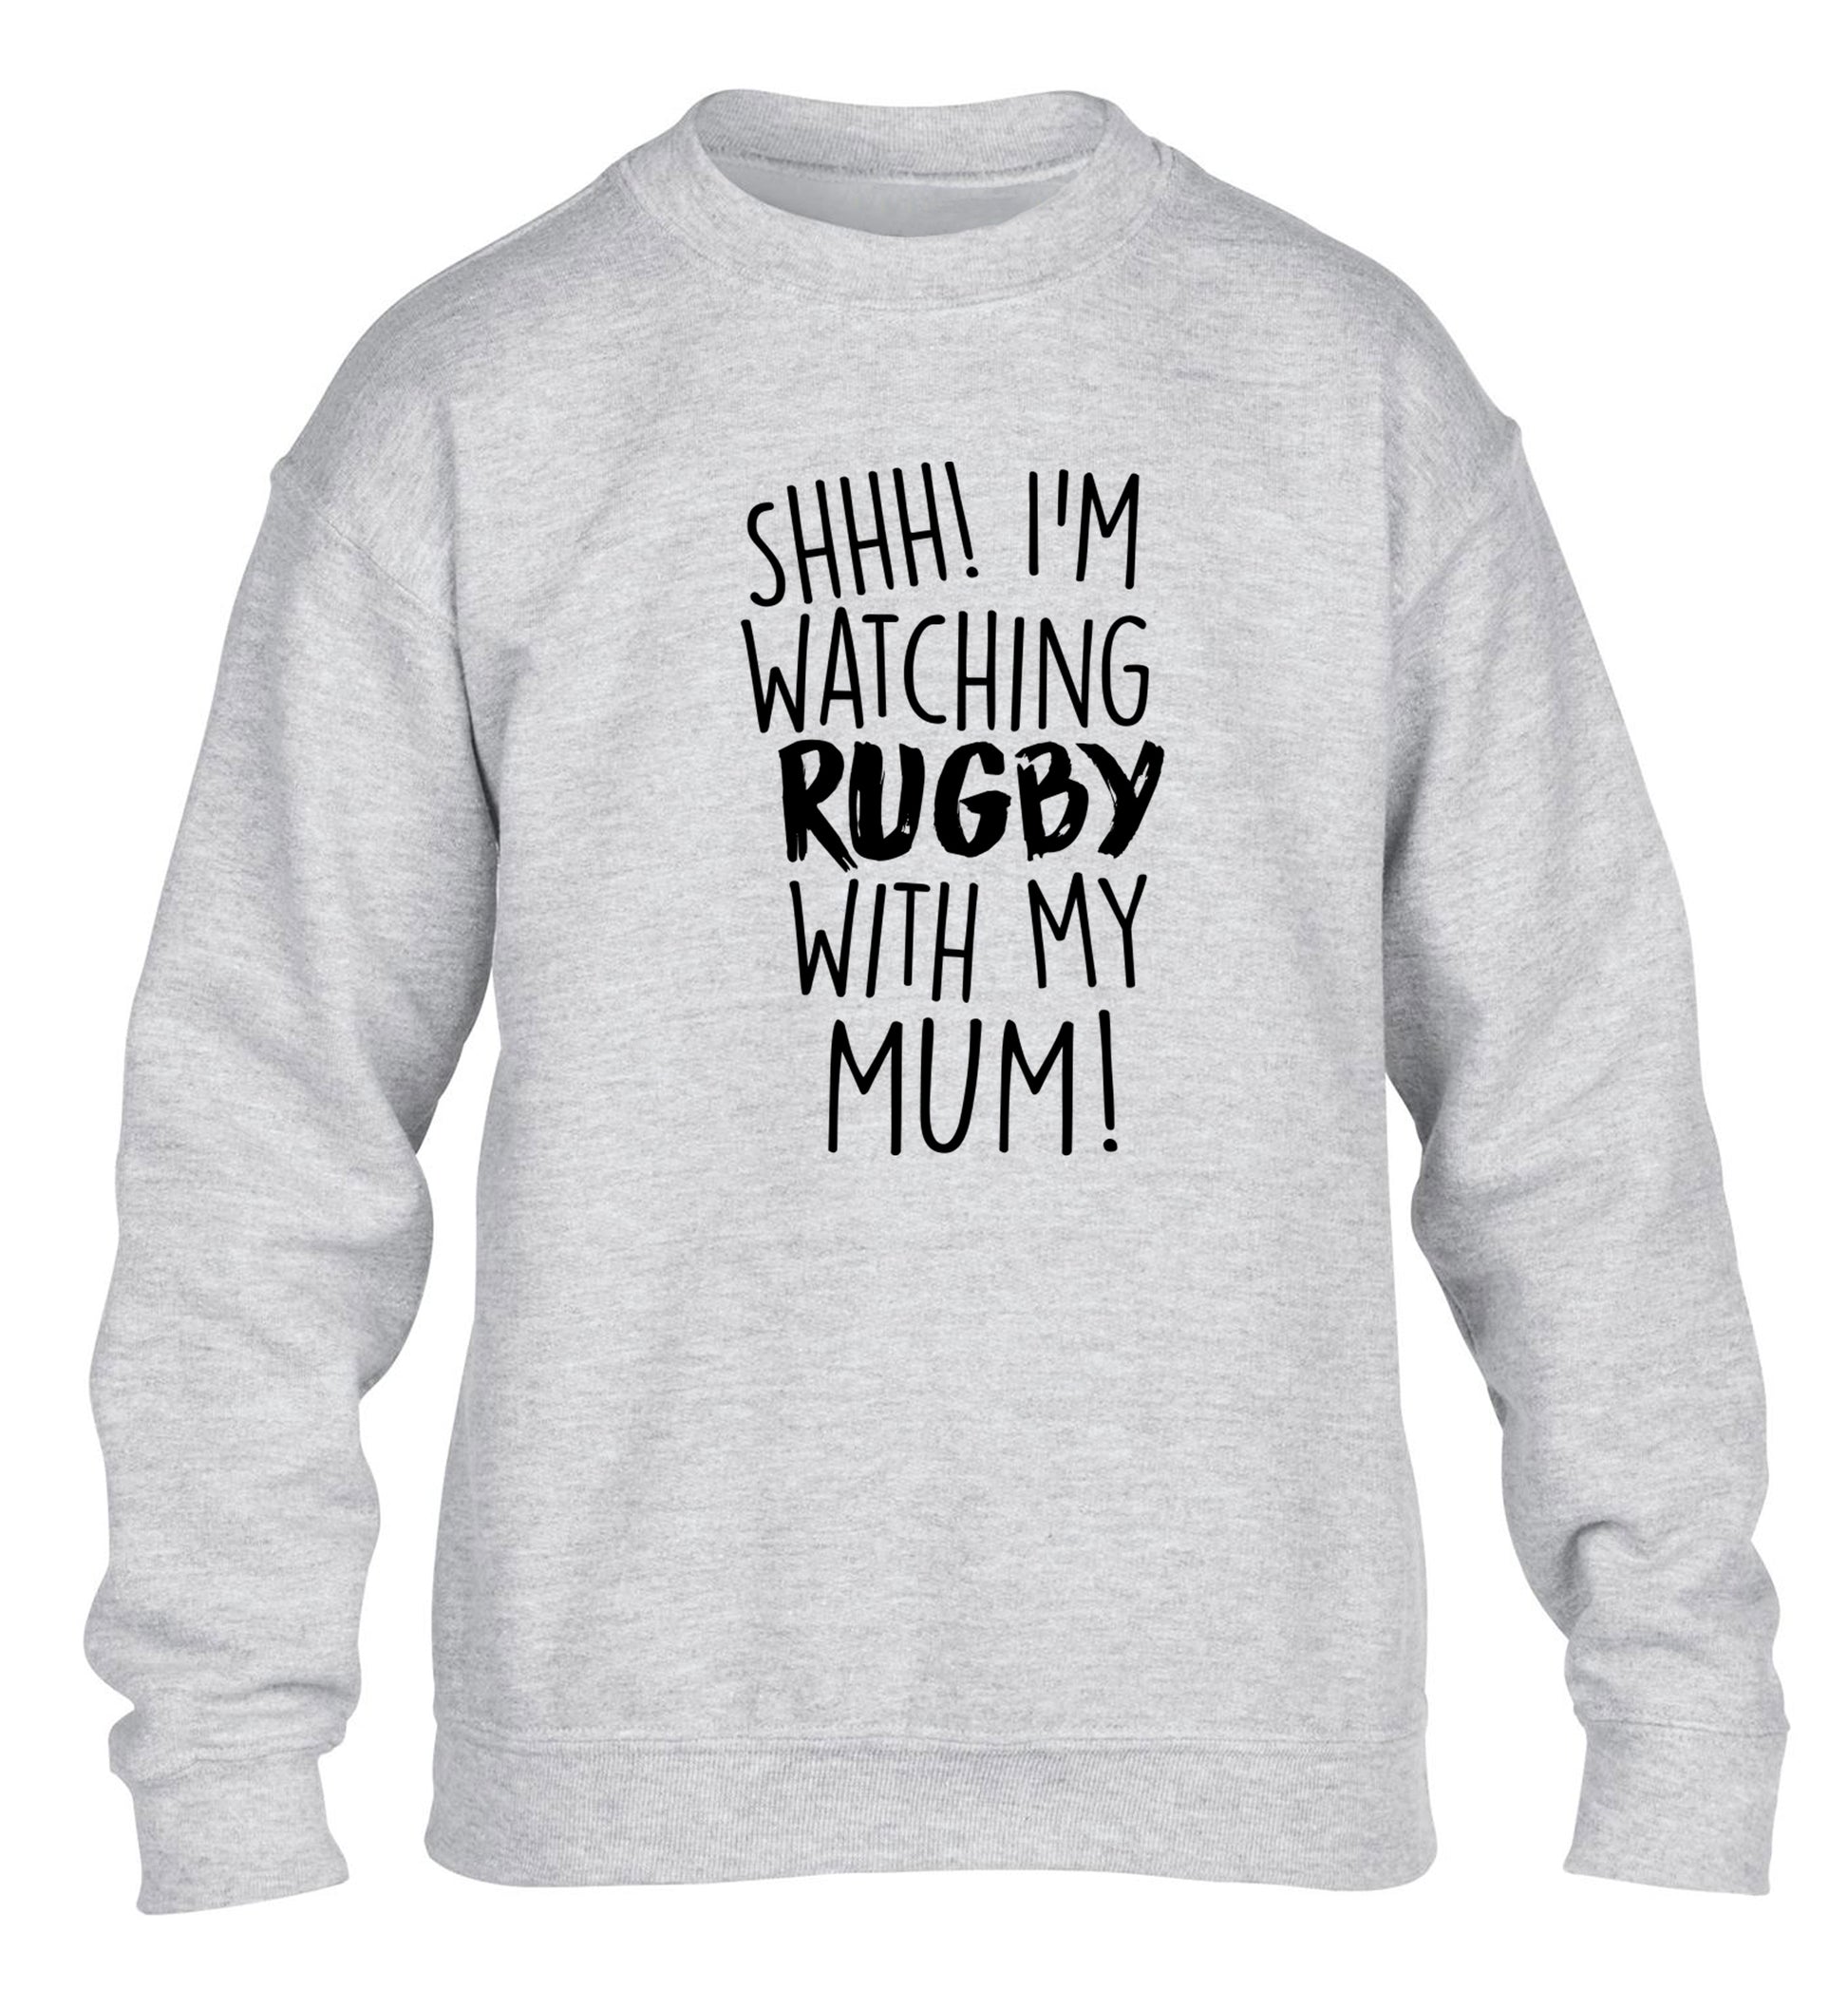 Shh... I'm watching rugby with my mum children's grey sweater 12-13 Years